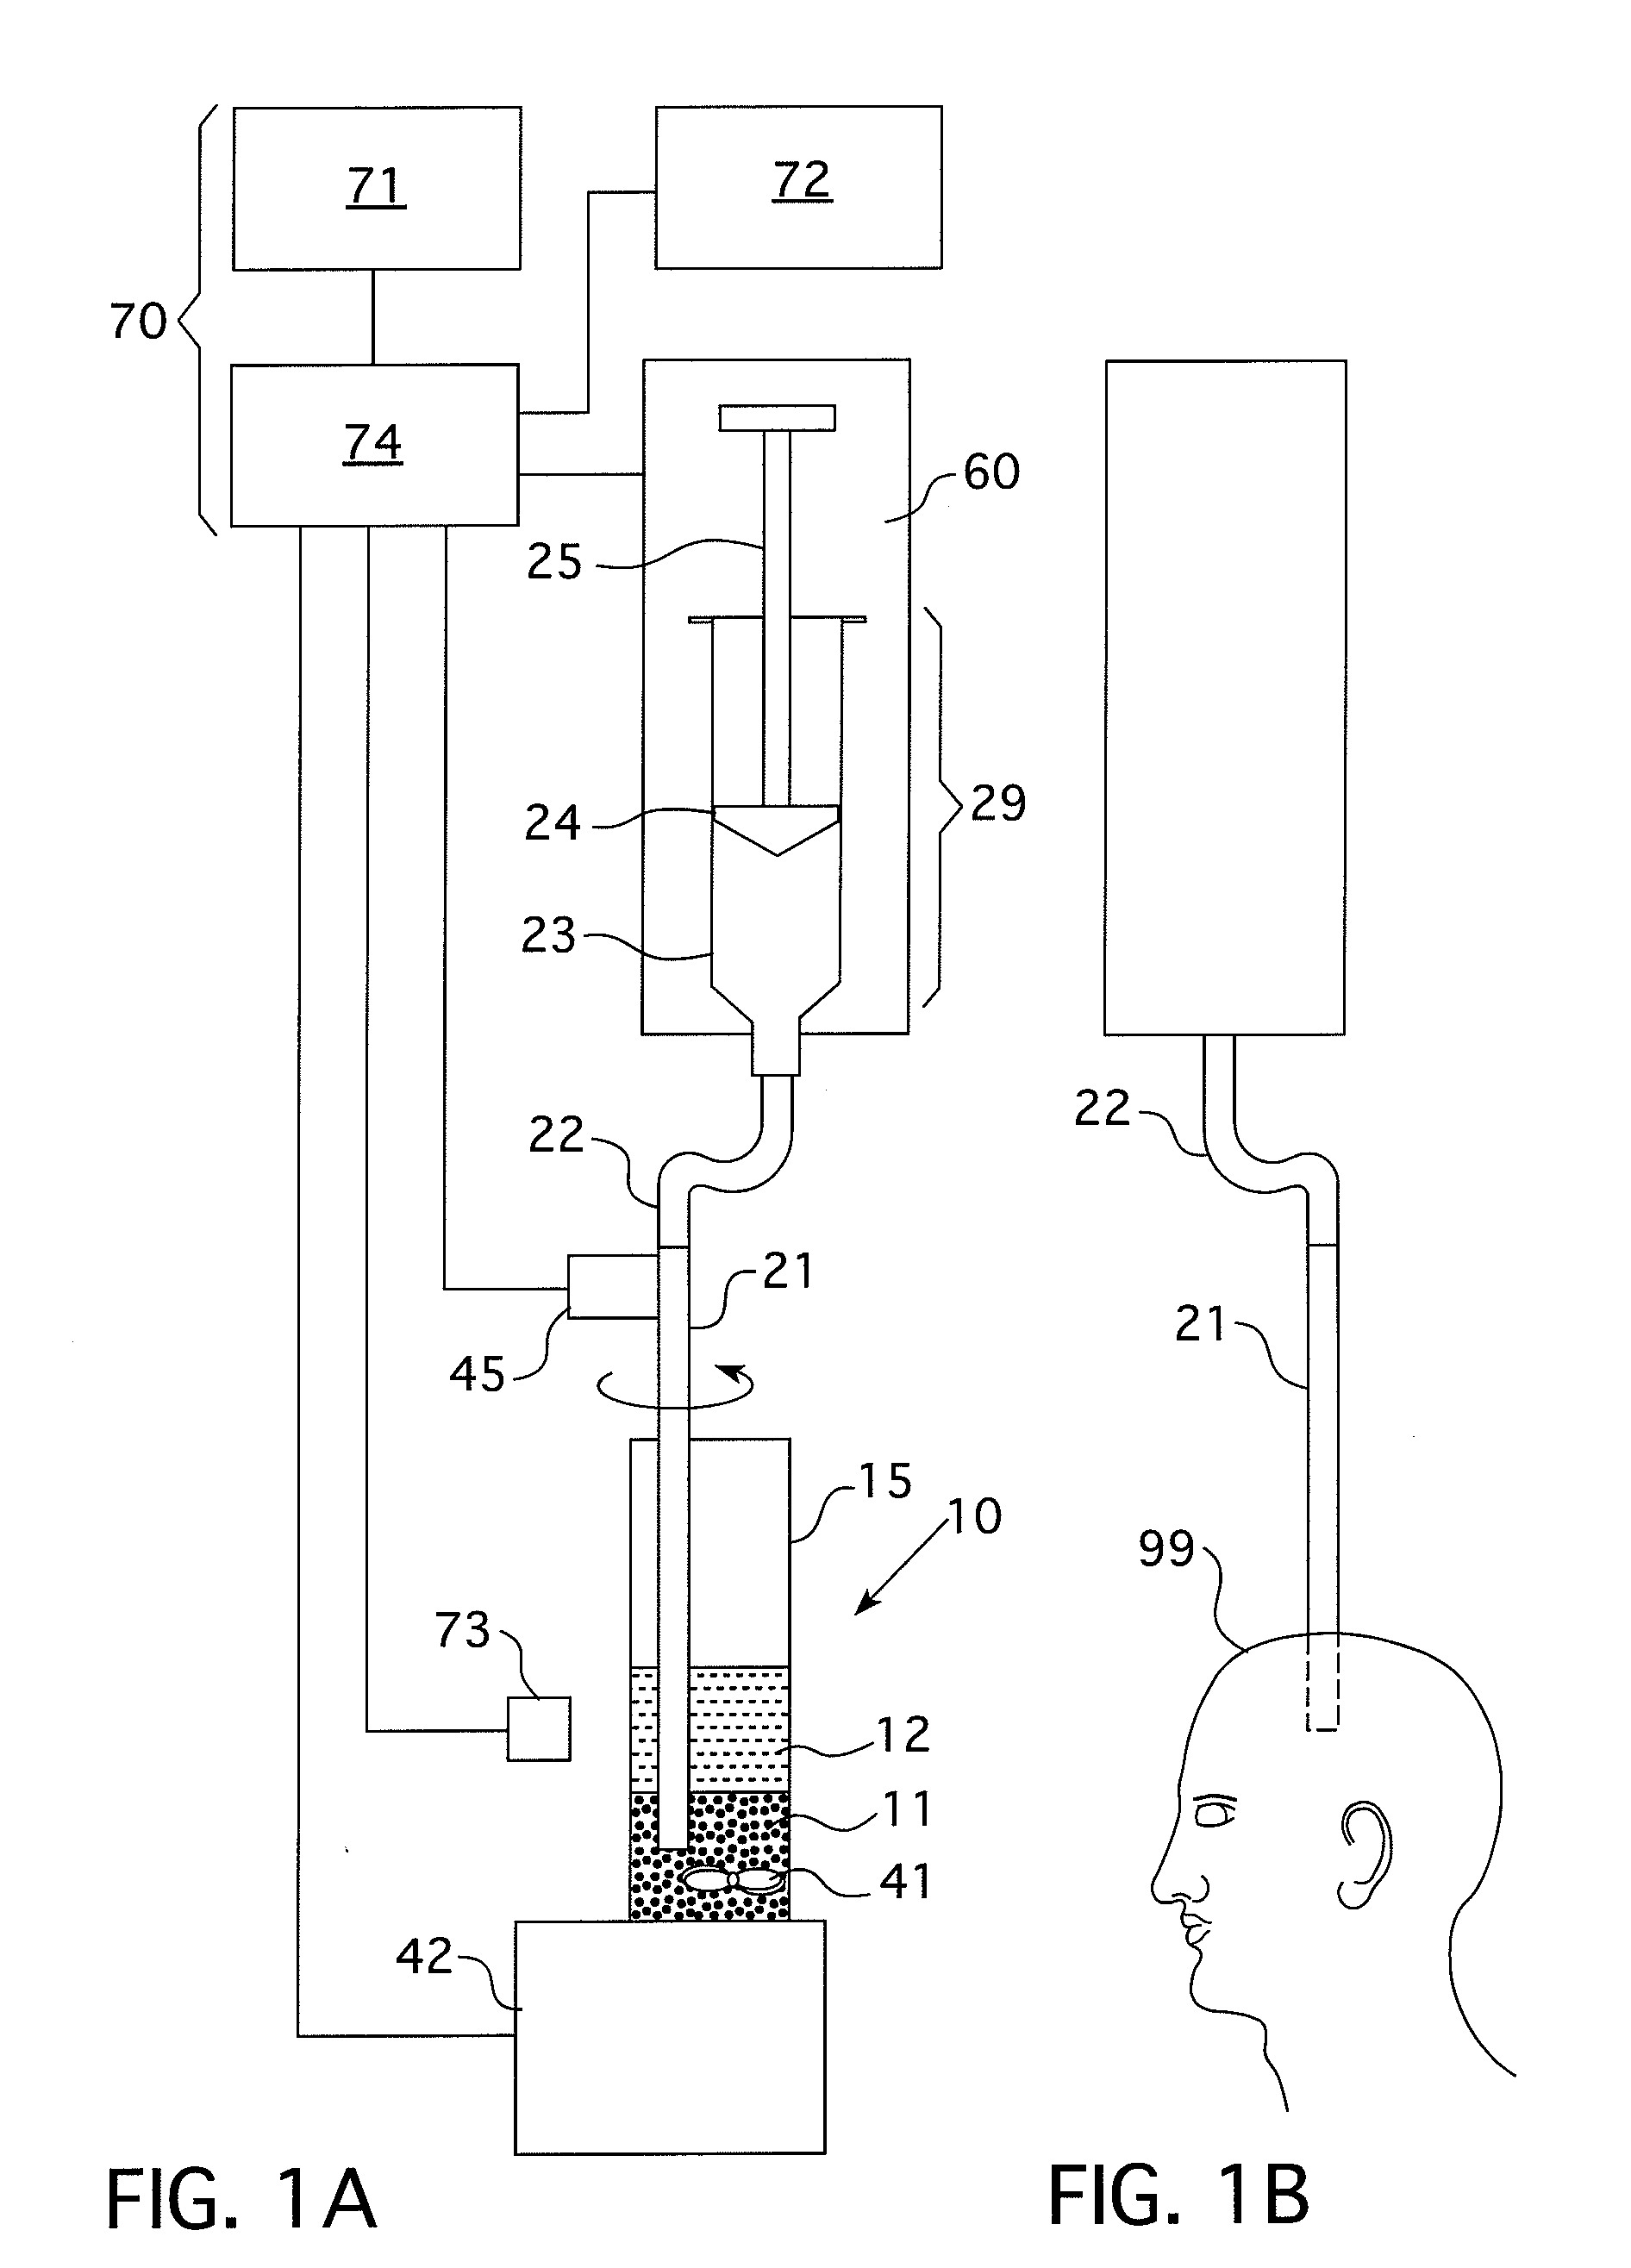 Systems and methods of delivering a dilated slurry to a patient